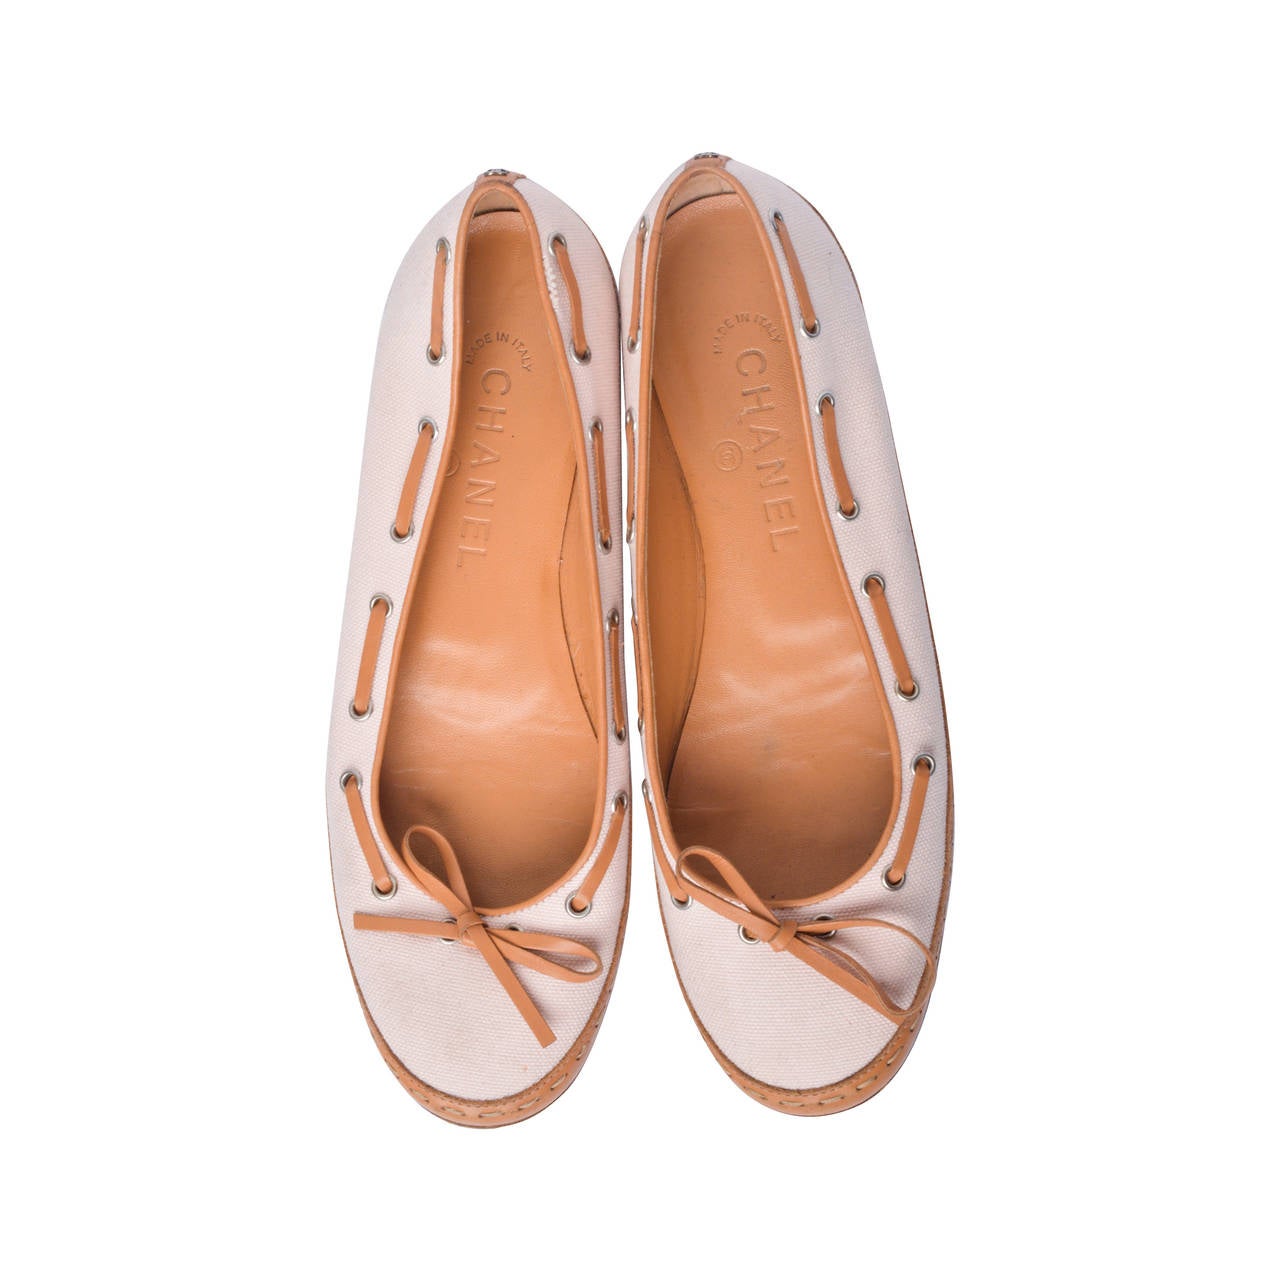 Chanel Pink & Tan Canvas & Leather Ballet Flats Size 37